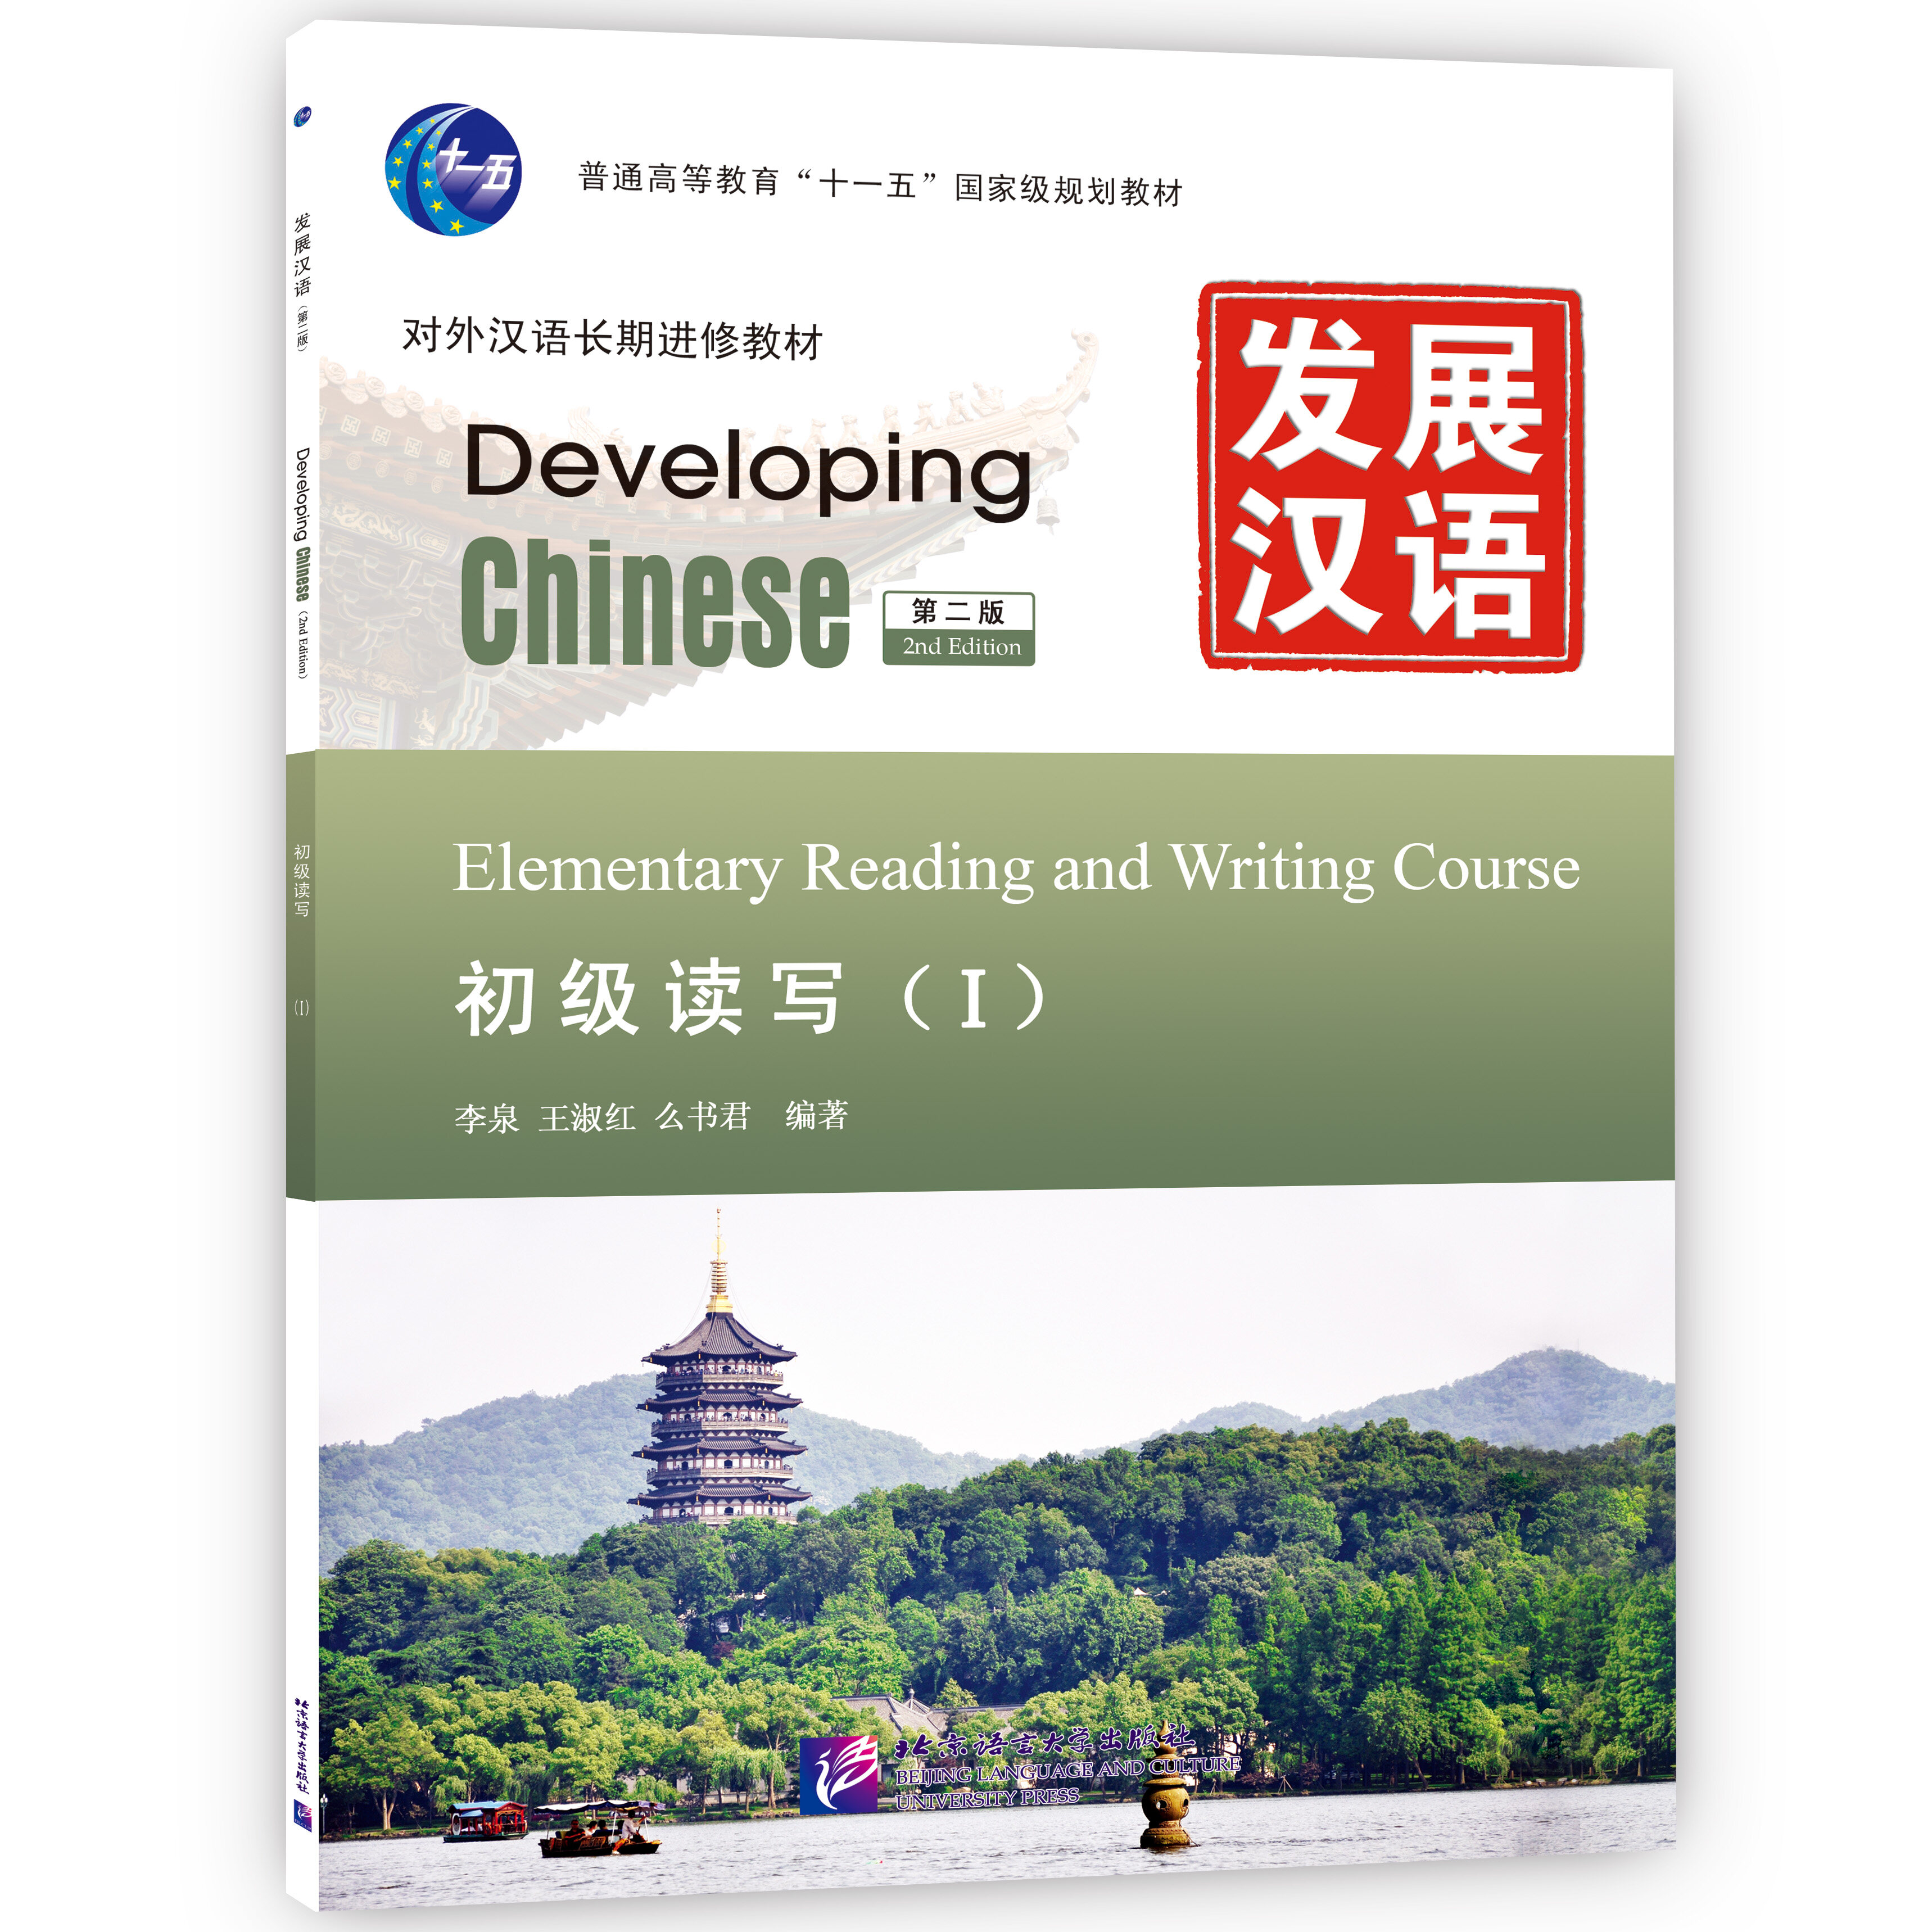 Developing Chinese: Elementary Reading and Writing Course 1 发展汉语（第2版）初级读写（Ⅰ）